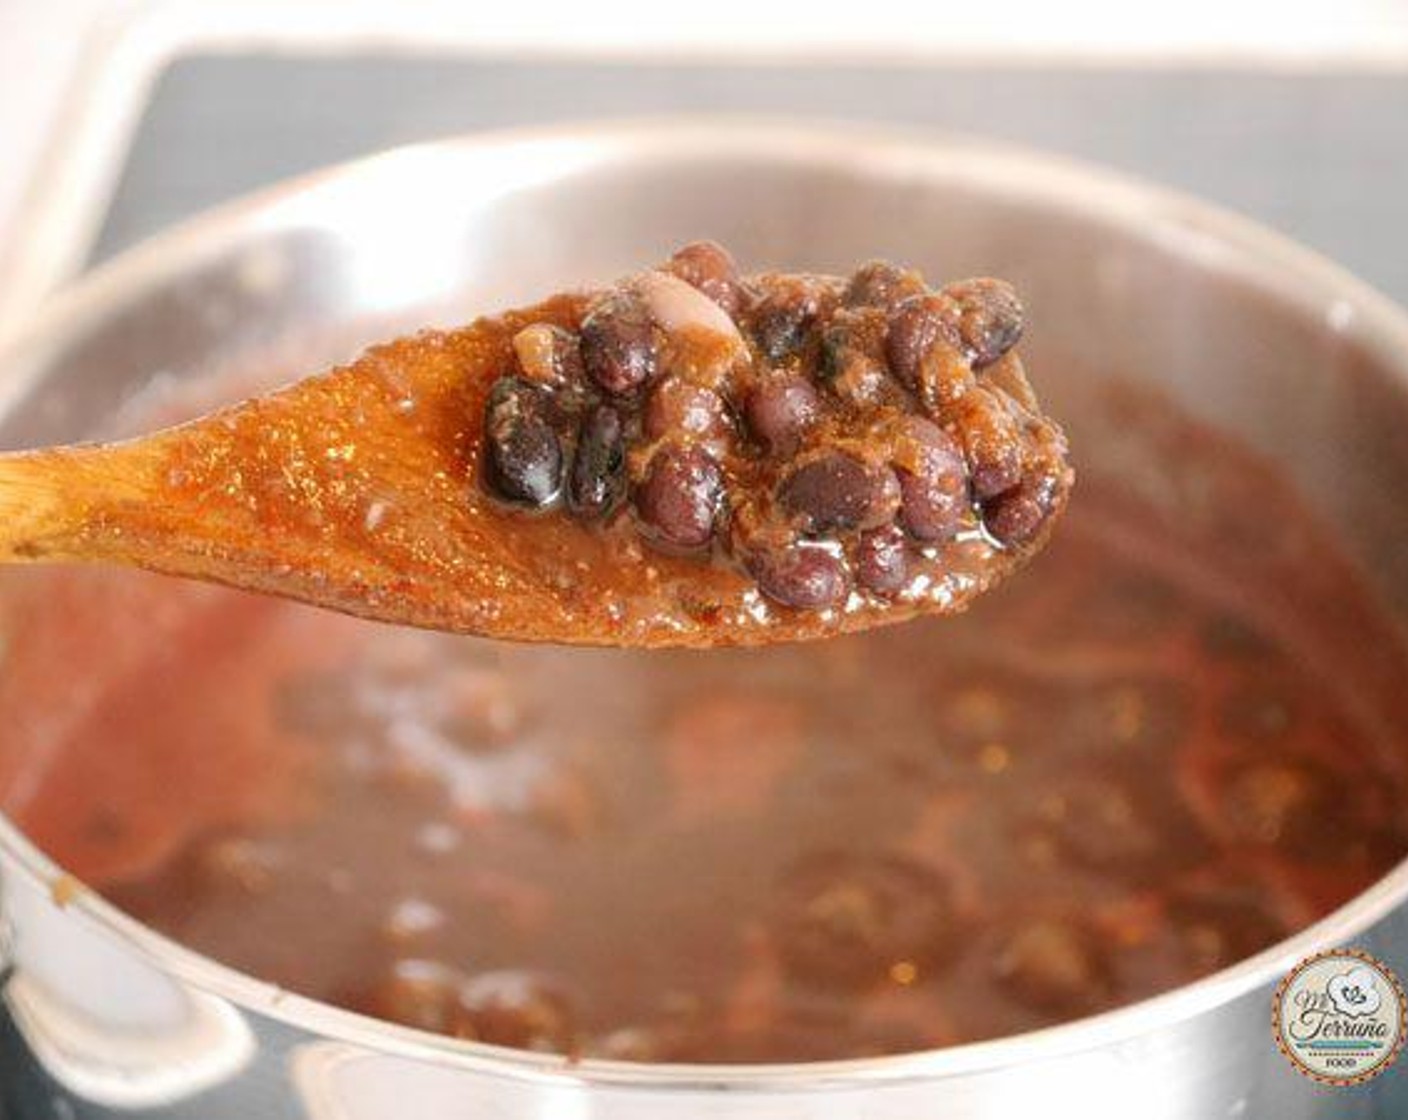 step 4 When the beans are half way cooked, add the tomato sauce to the beans with Salt (1/2 tsp), Roasted Cumin Powder (1/2 tsp), and Dried Oregano (1/2 tsp) leave to cook for approx 30 minutes or until the beans are soft. Stir occasionally to avoid the beans sticking to the pot.